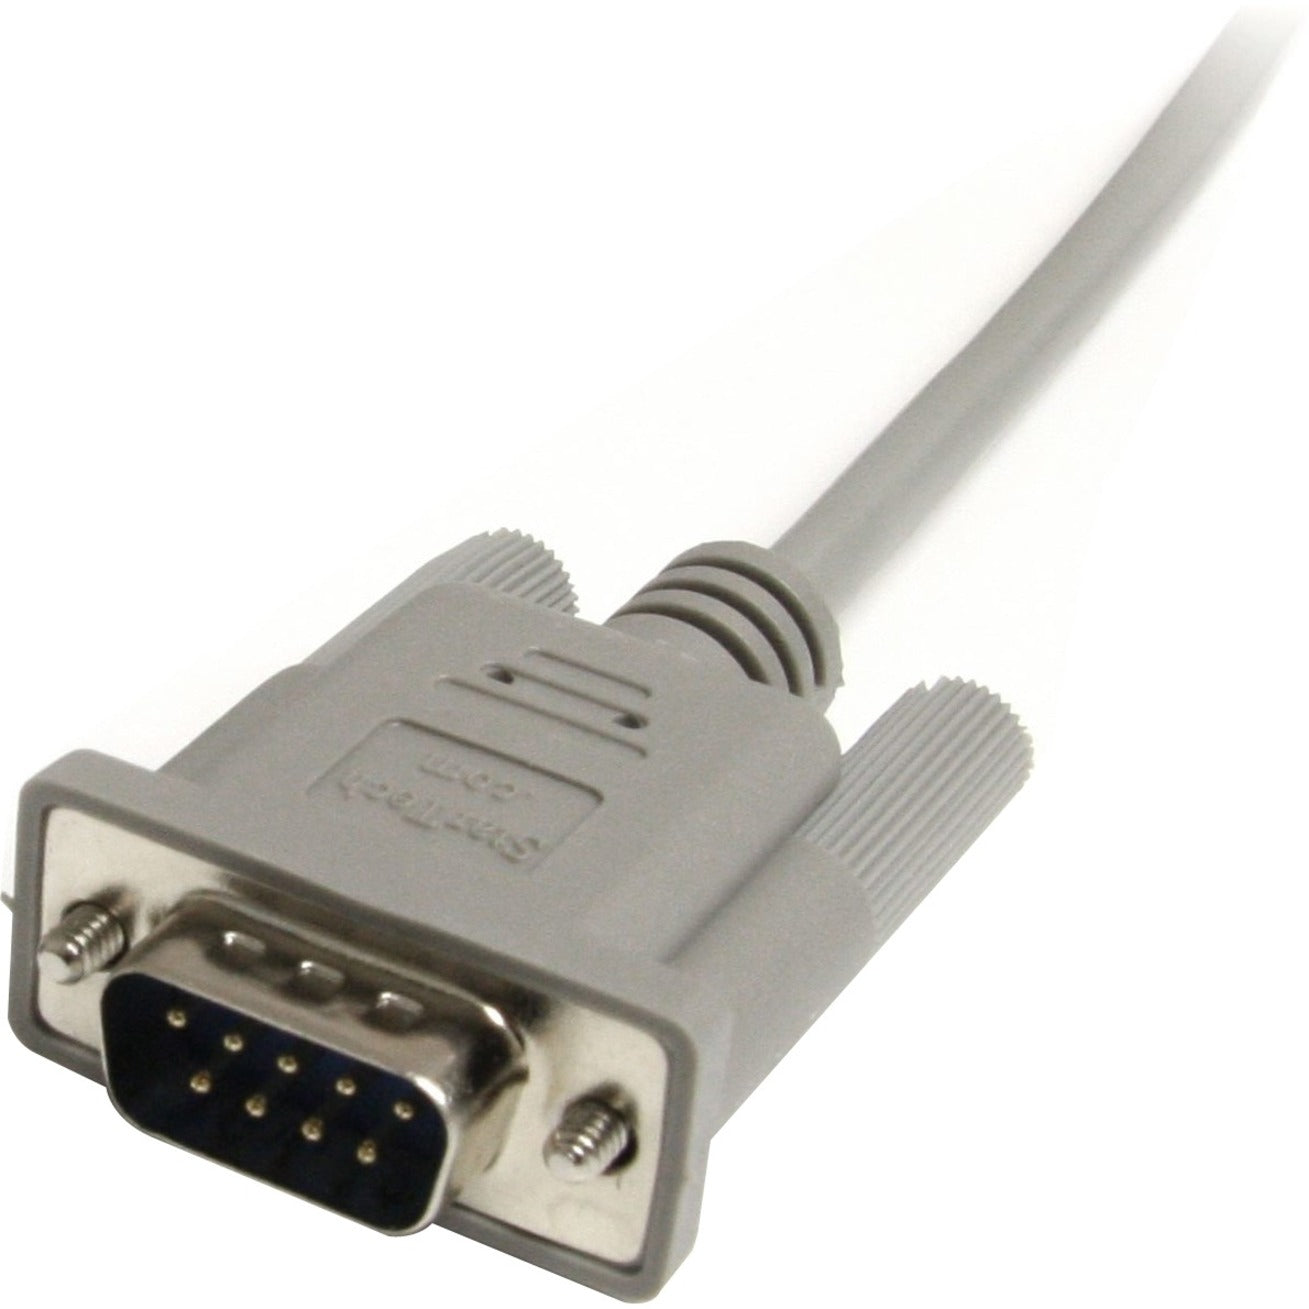 StarTech.com MXT100 Null-Modem Serial Cable, 6 ft, Copper Conductor, Straight-through Extension Cable